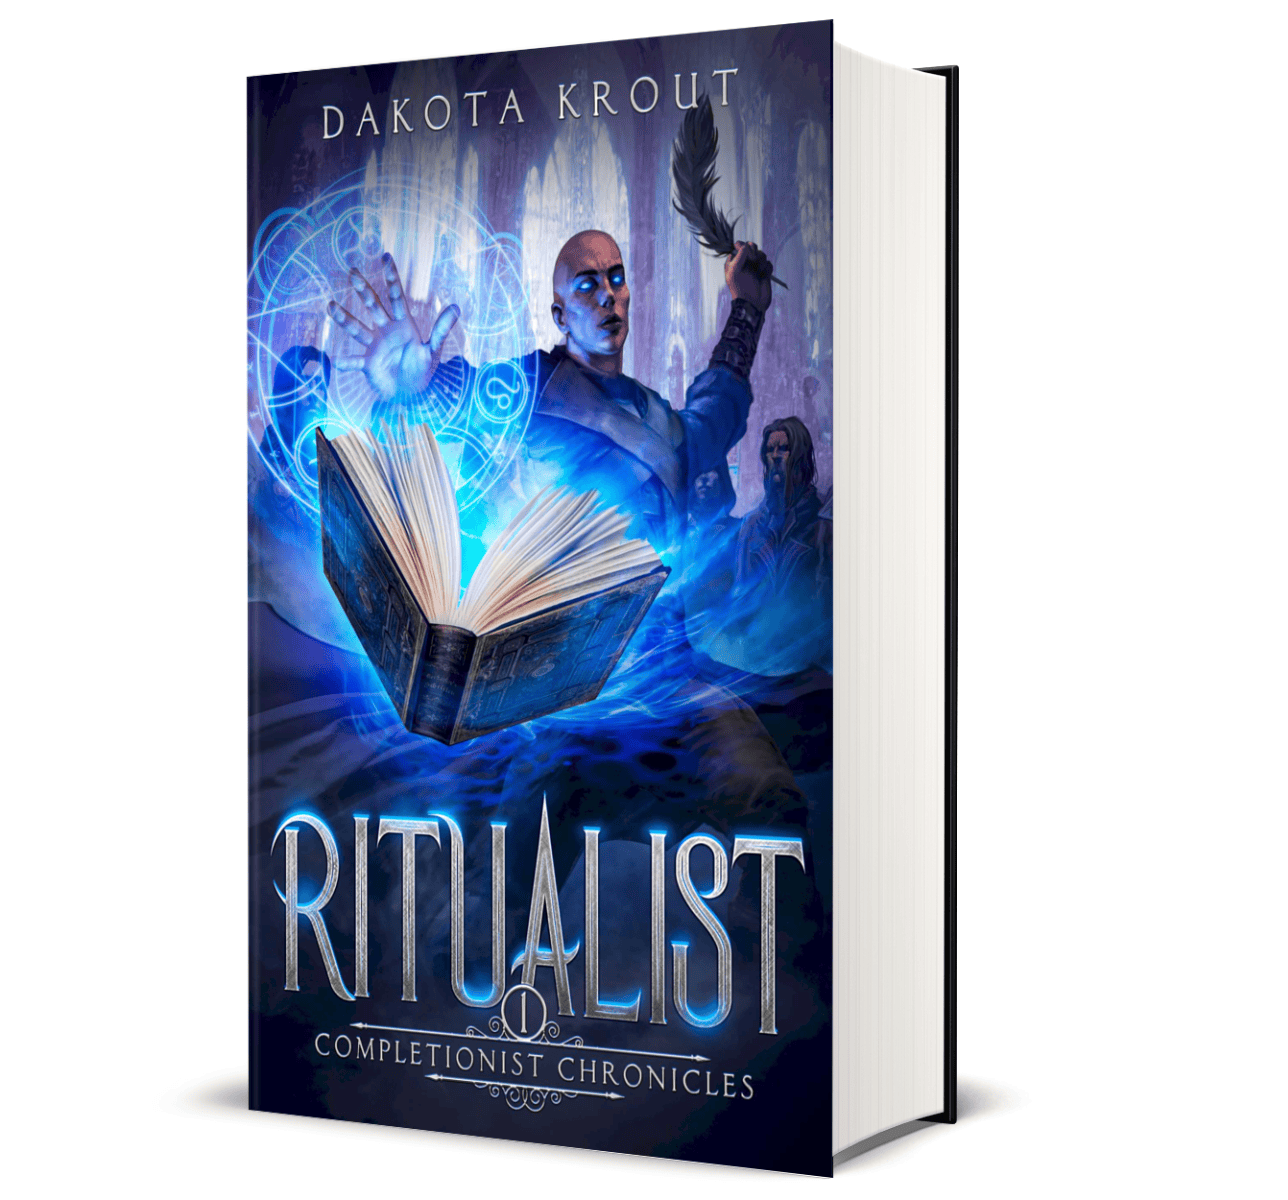 Ritualist | Book 1 in the Completionist Chronicles